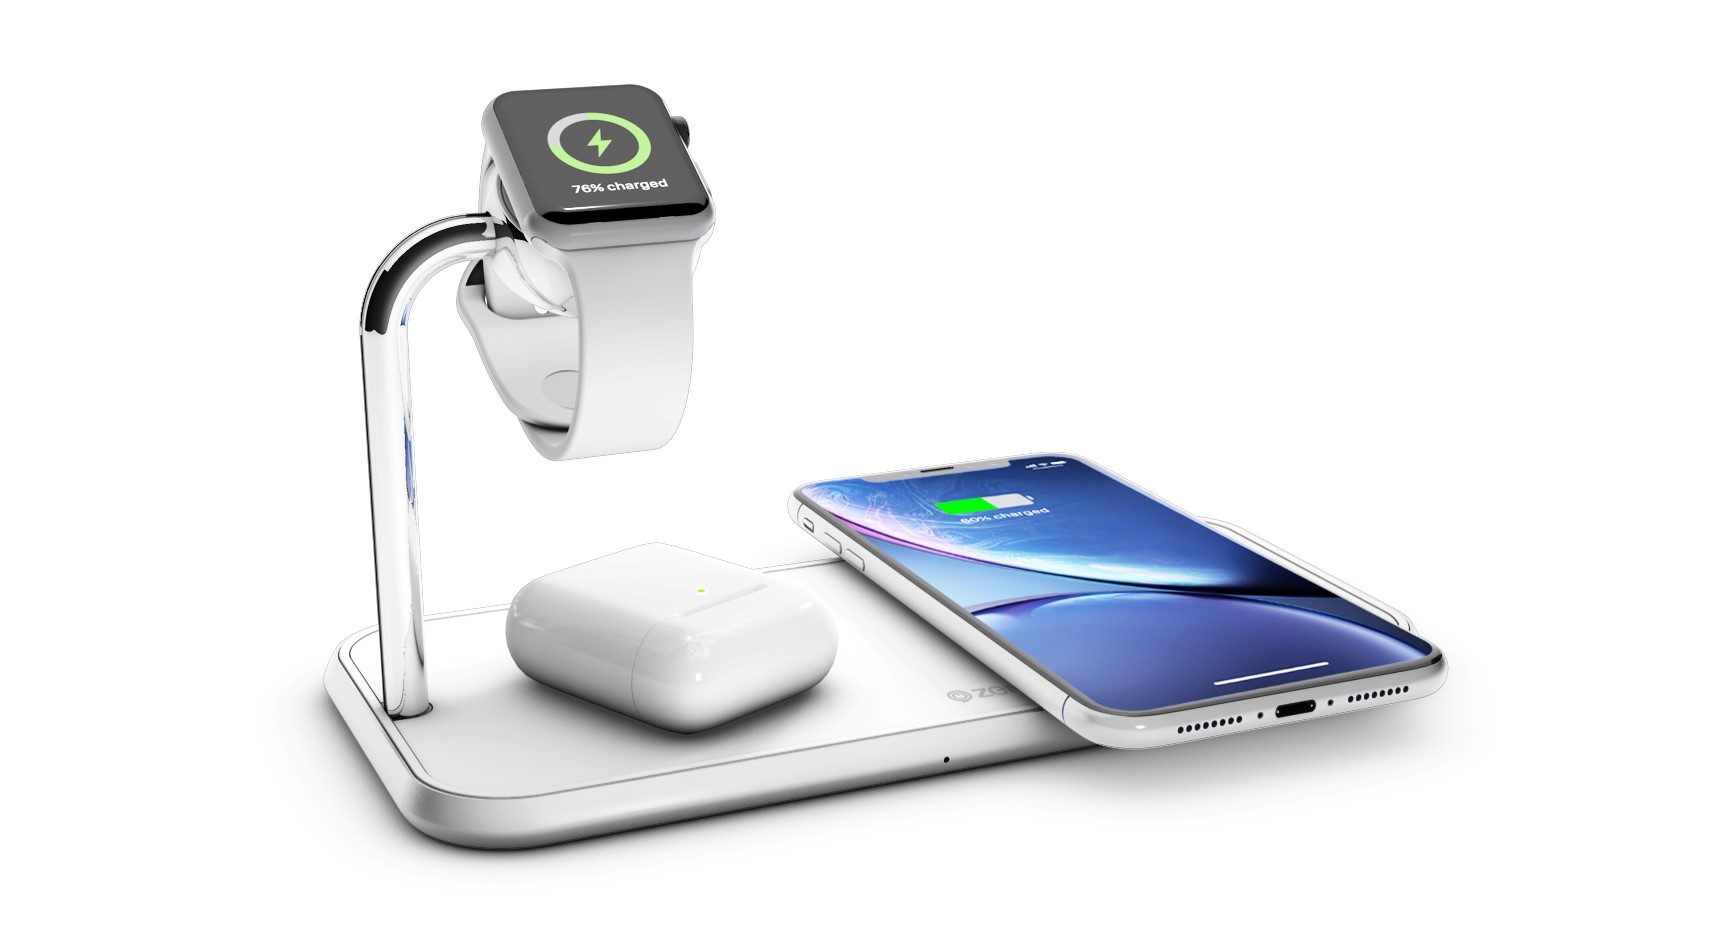 ZENS Dual+Watch Aluminium Wireless Charger with Apple Watch, AirPods and iPhone Xr AirPower alternatives